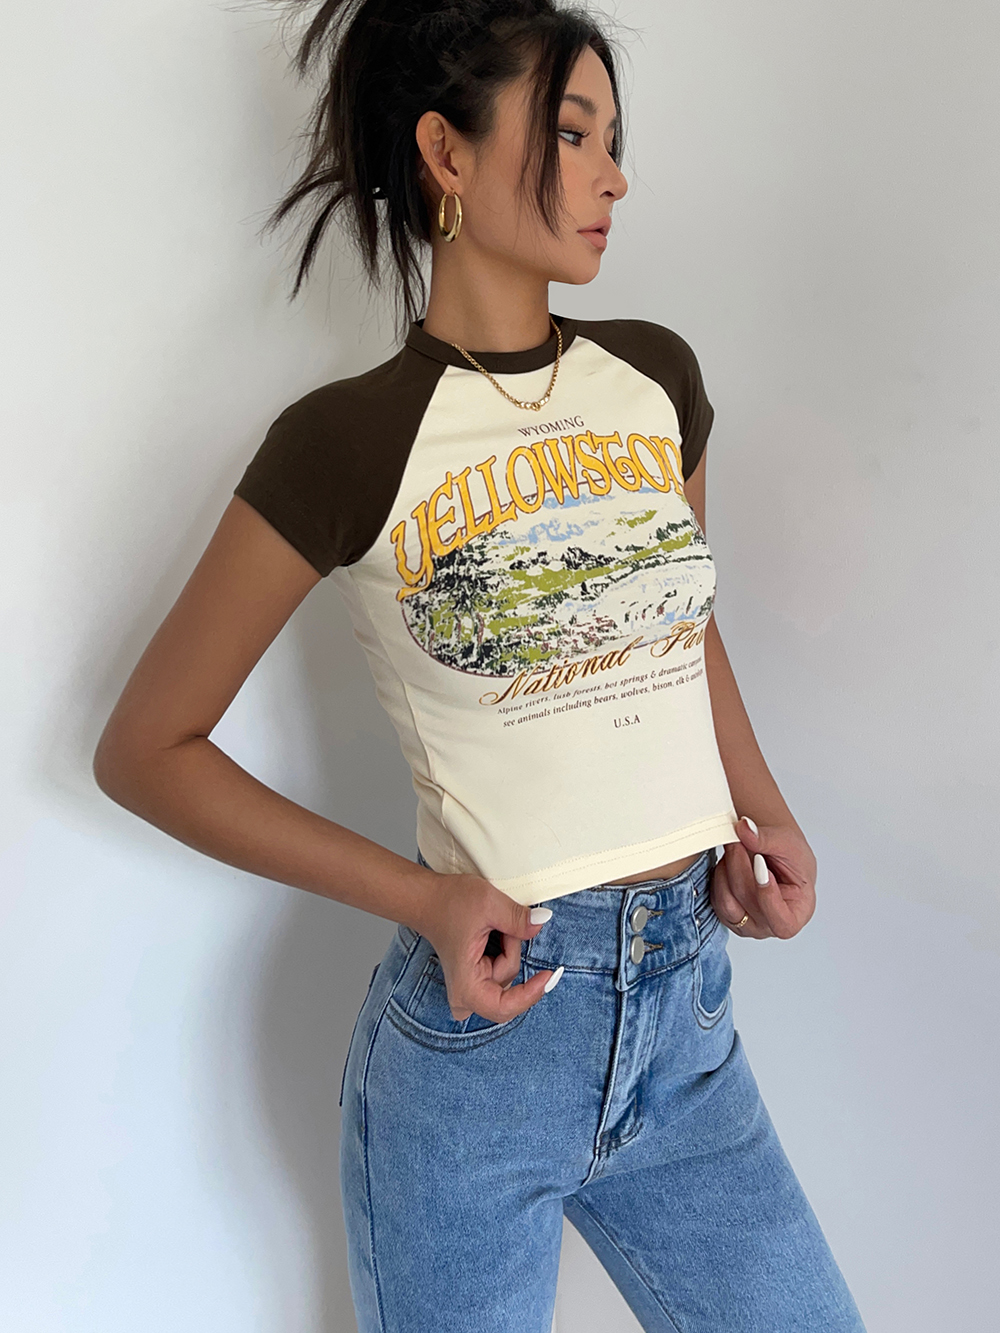 Printed Stitching Crop Top Short Sleeve Sexy Cute T-shirts Tee Crop Top